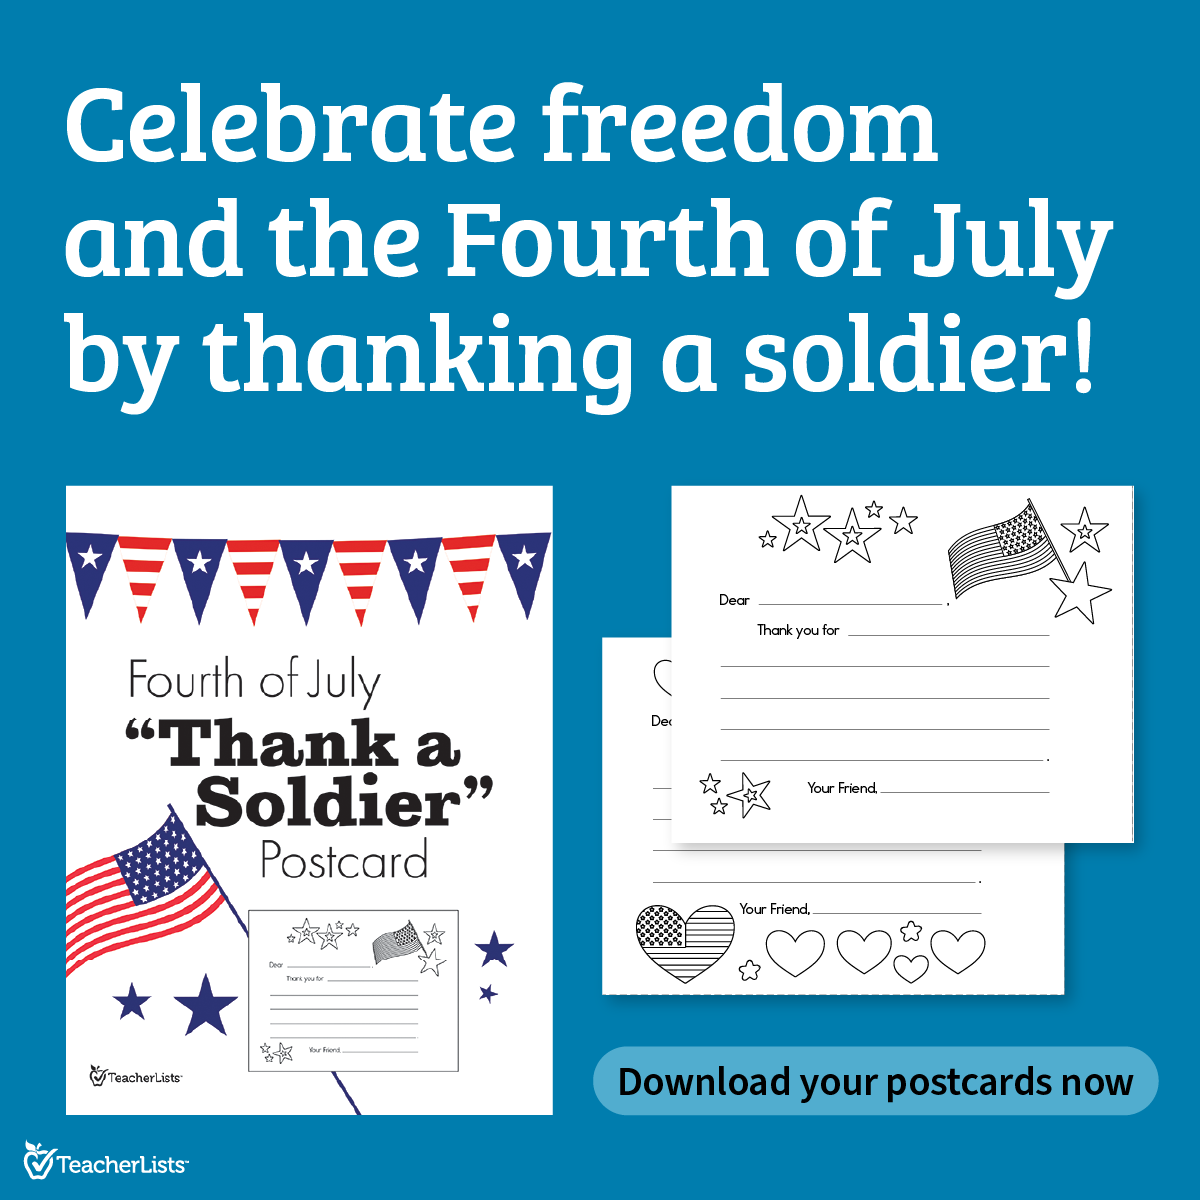 Fourth of July Postcards